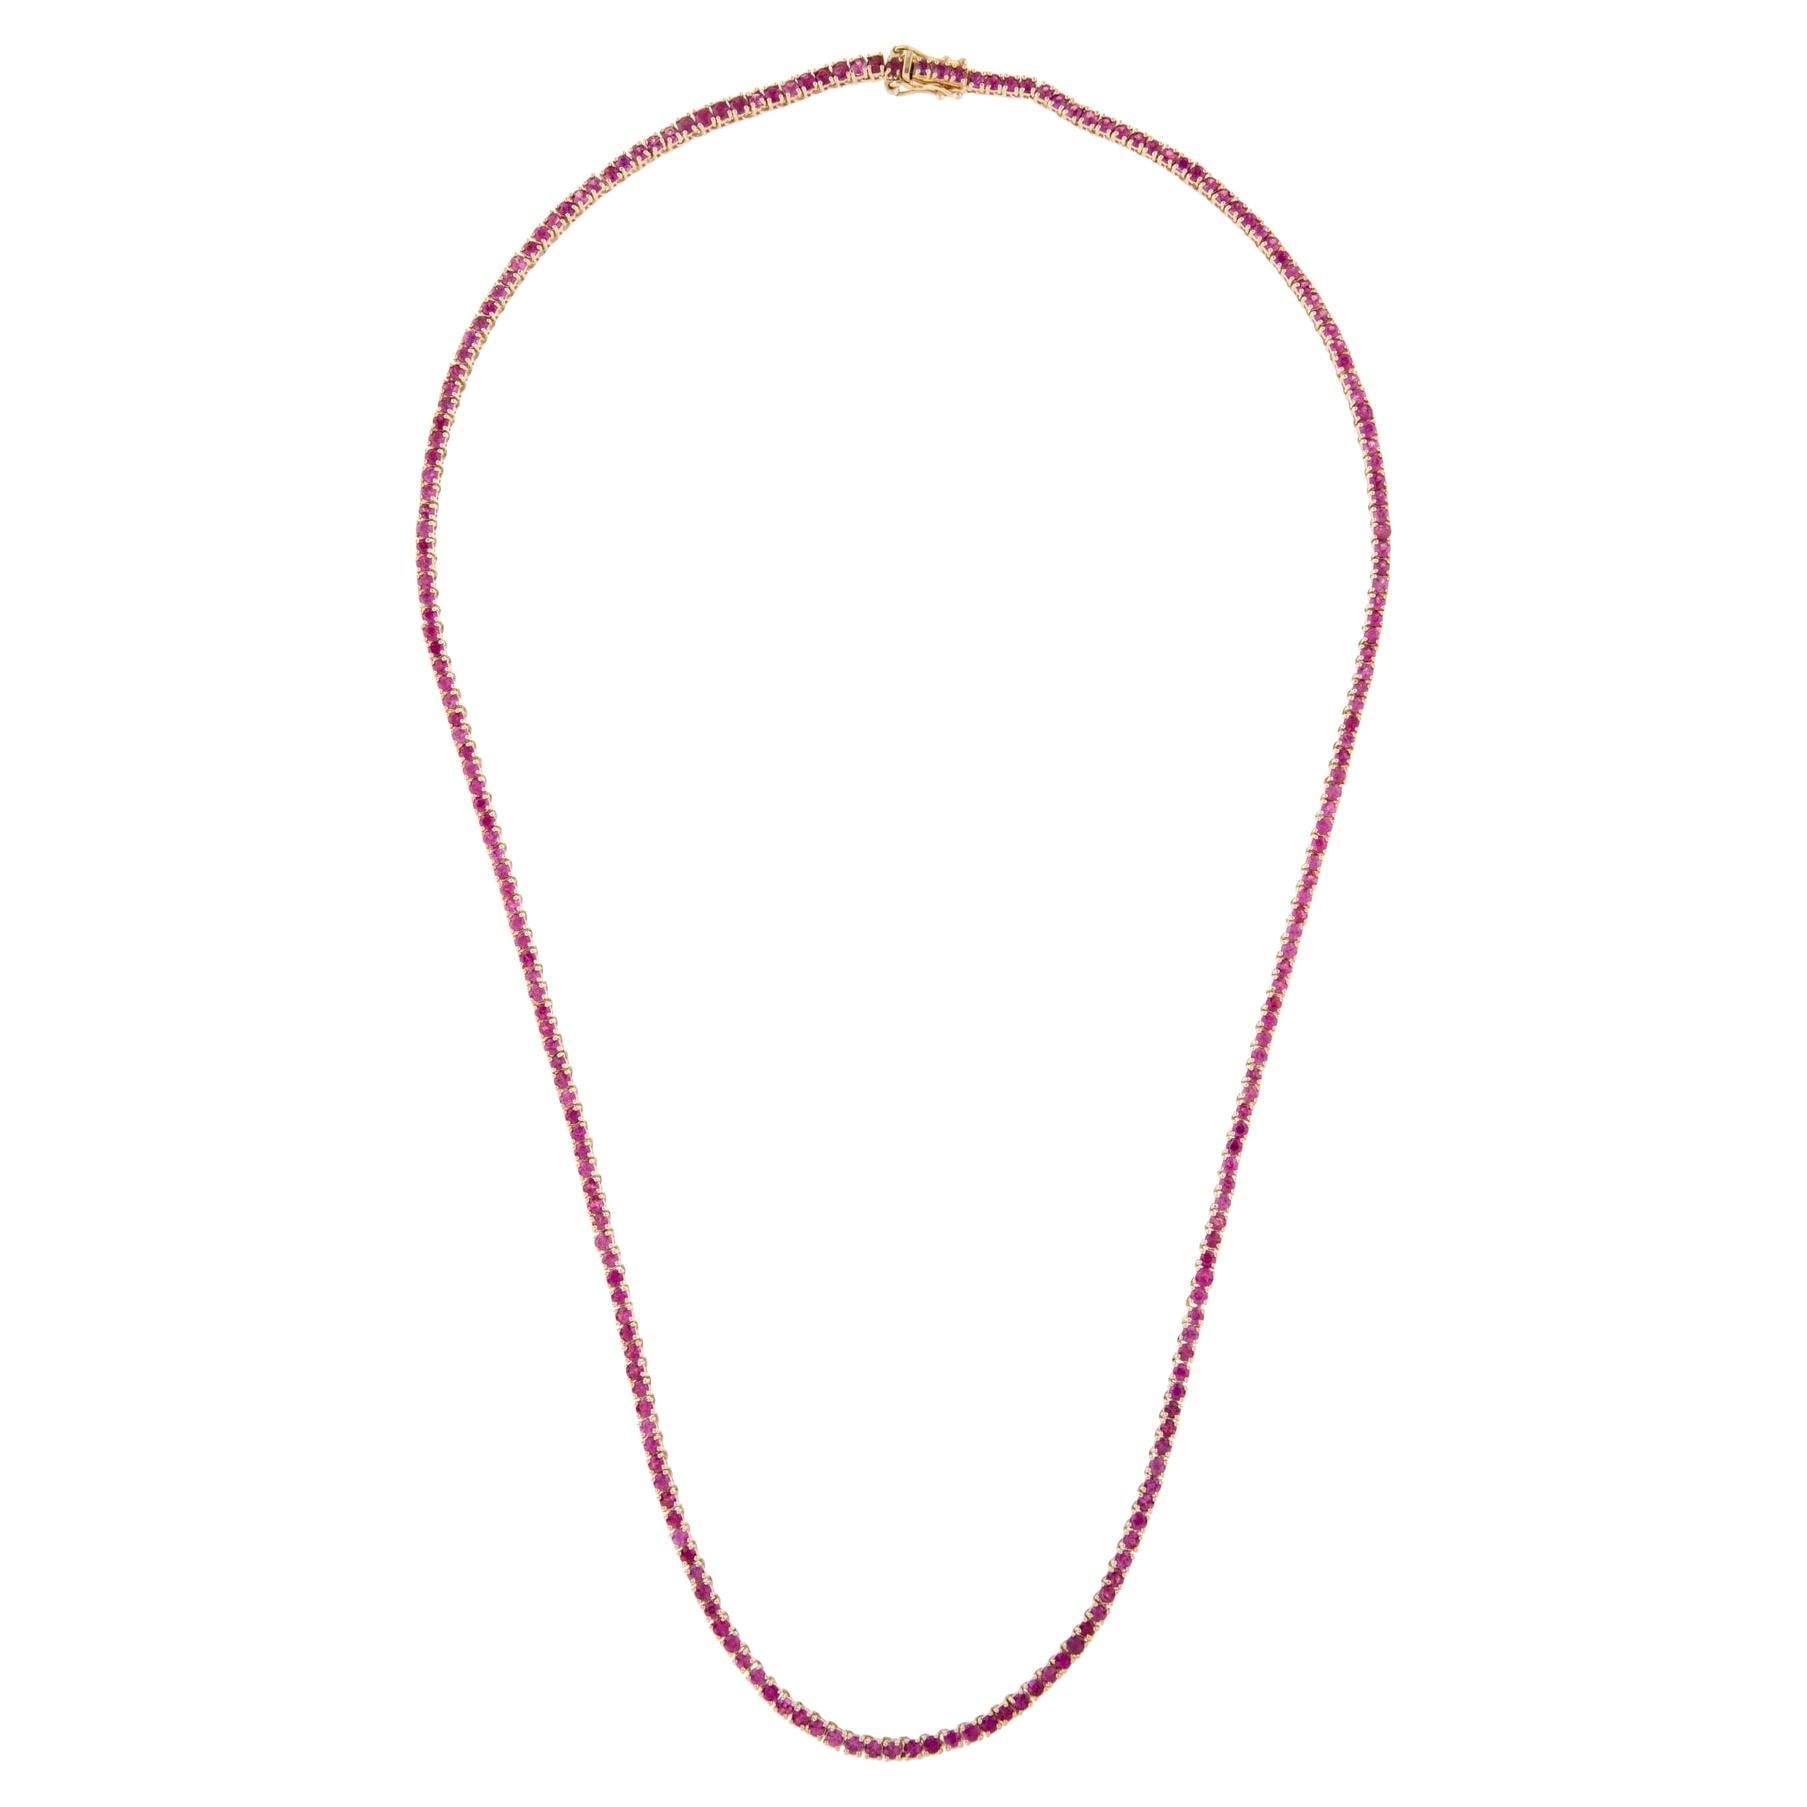 14K Ruby Chain Necklace 12.15ctw - Exquisite Jewelry Piece for Glamorous Style For Sale